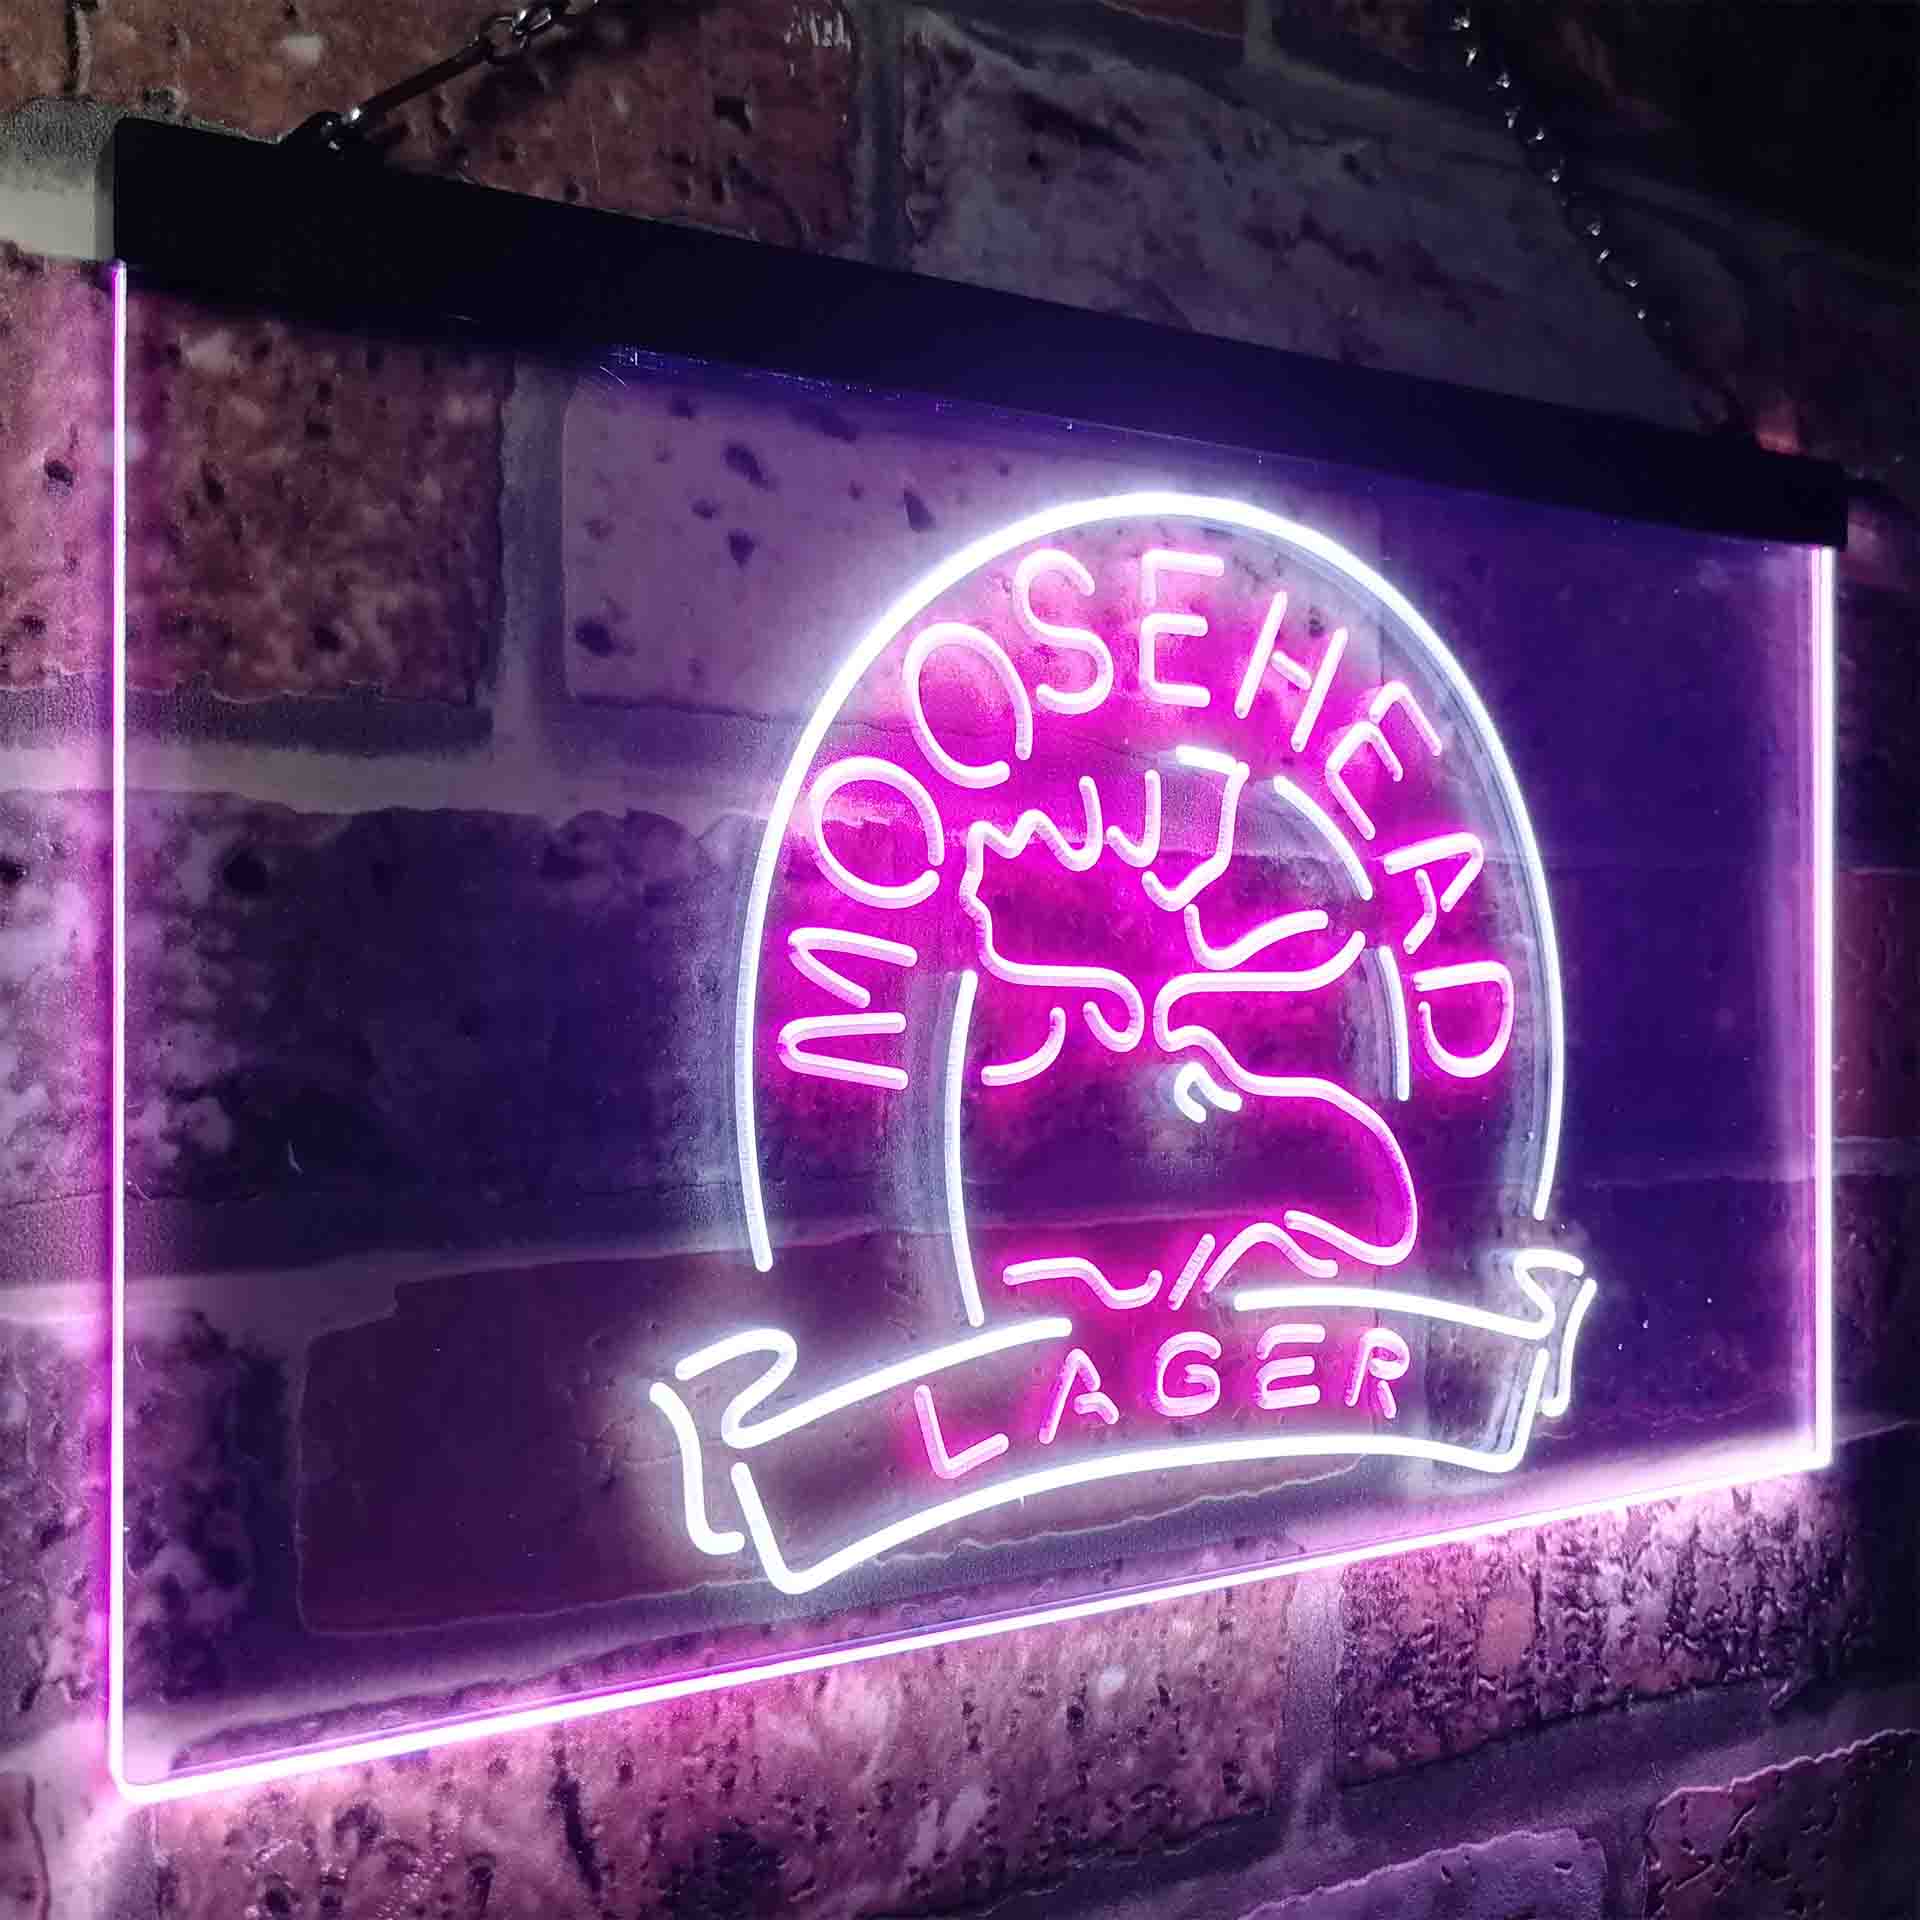 Moosehead Lager Beer Neon LED Sign